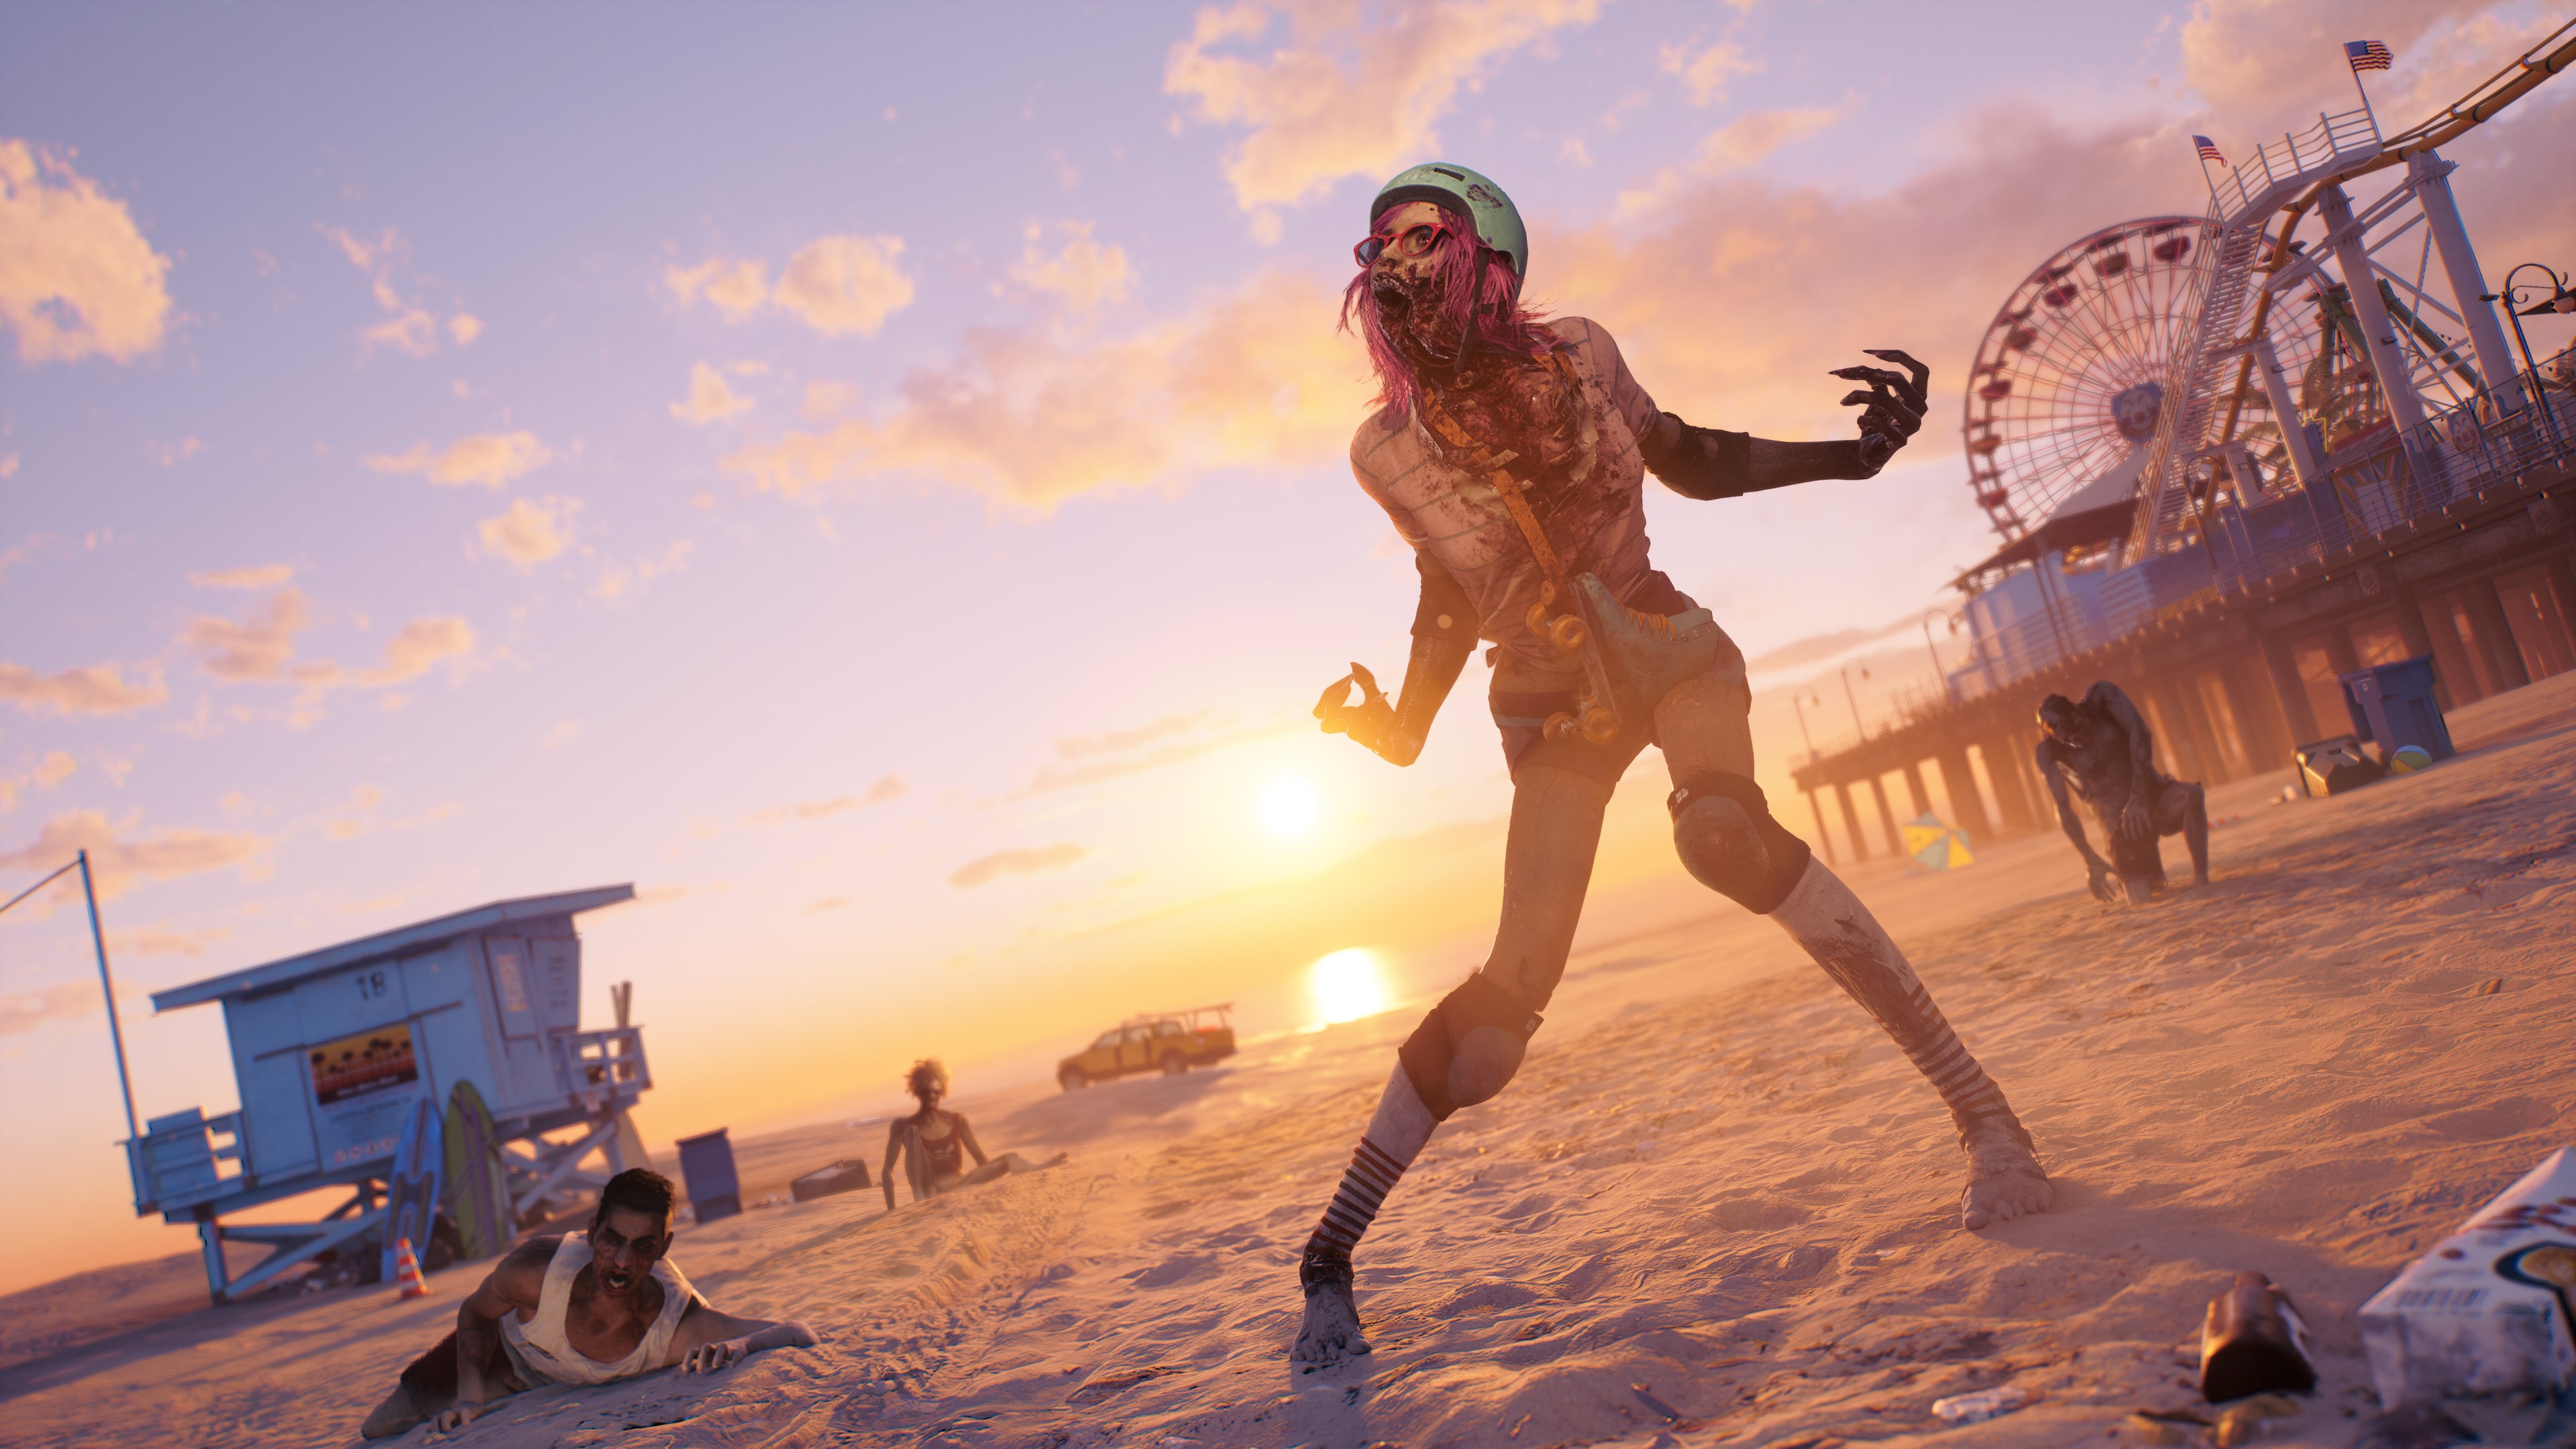 Dead Island 2 Gold Edition on PS4 PS5 — price history, screenshots,  discounts • USA